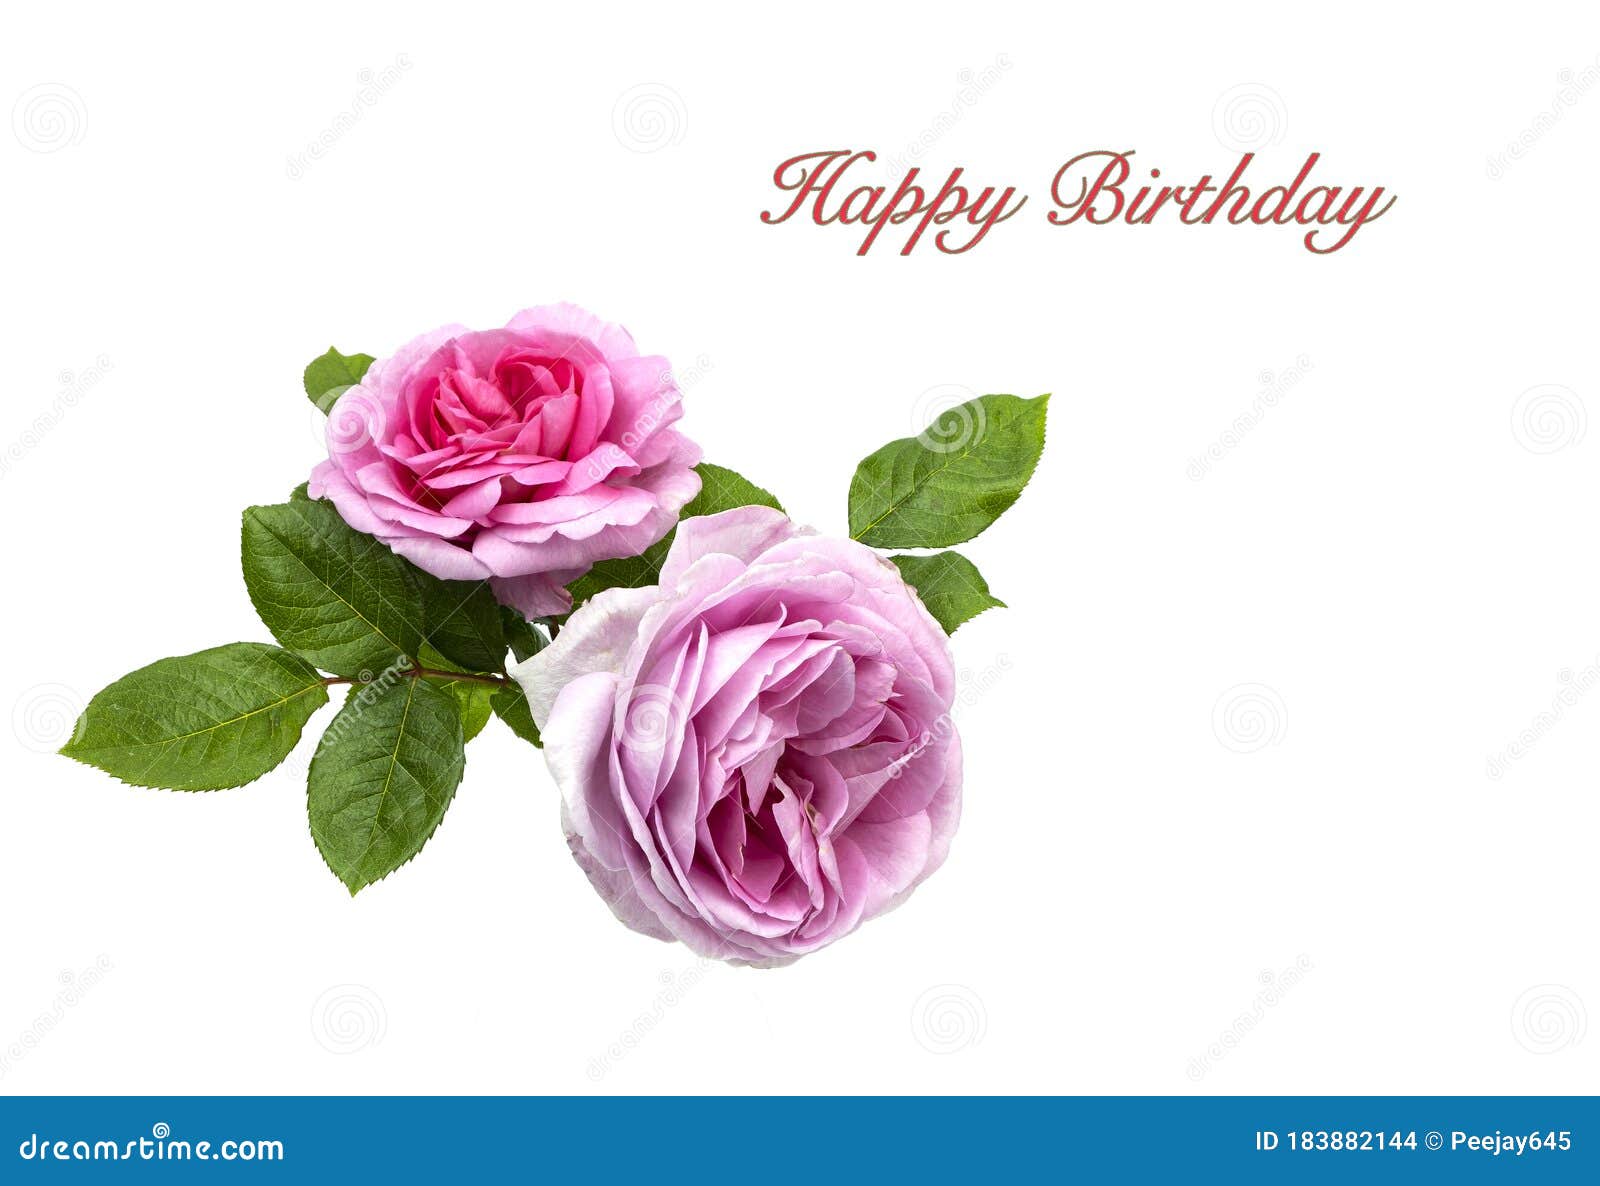 Happy Birthday Card With Pink Roses Bouquet Isolated On White